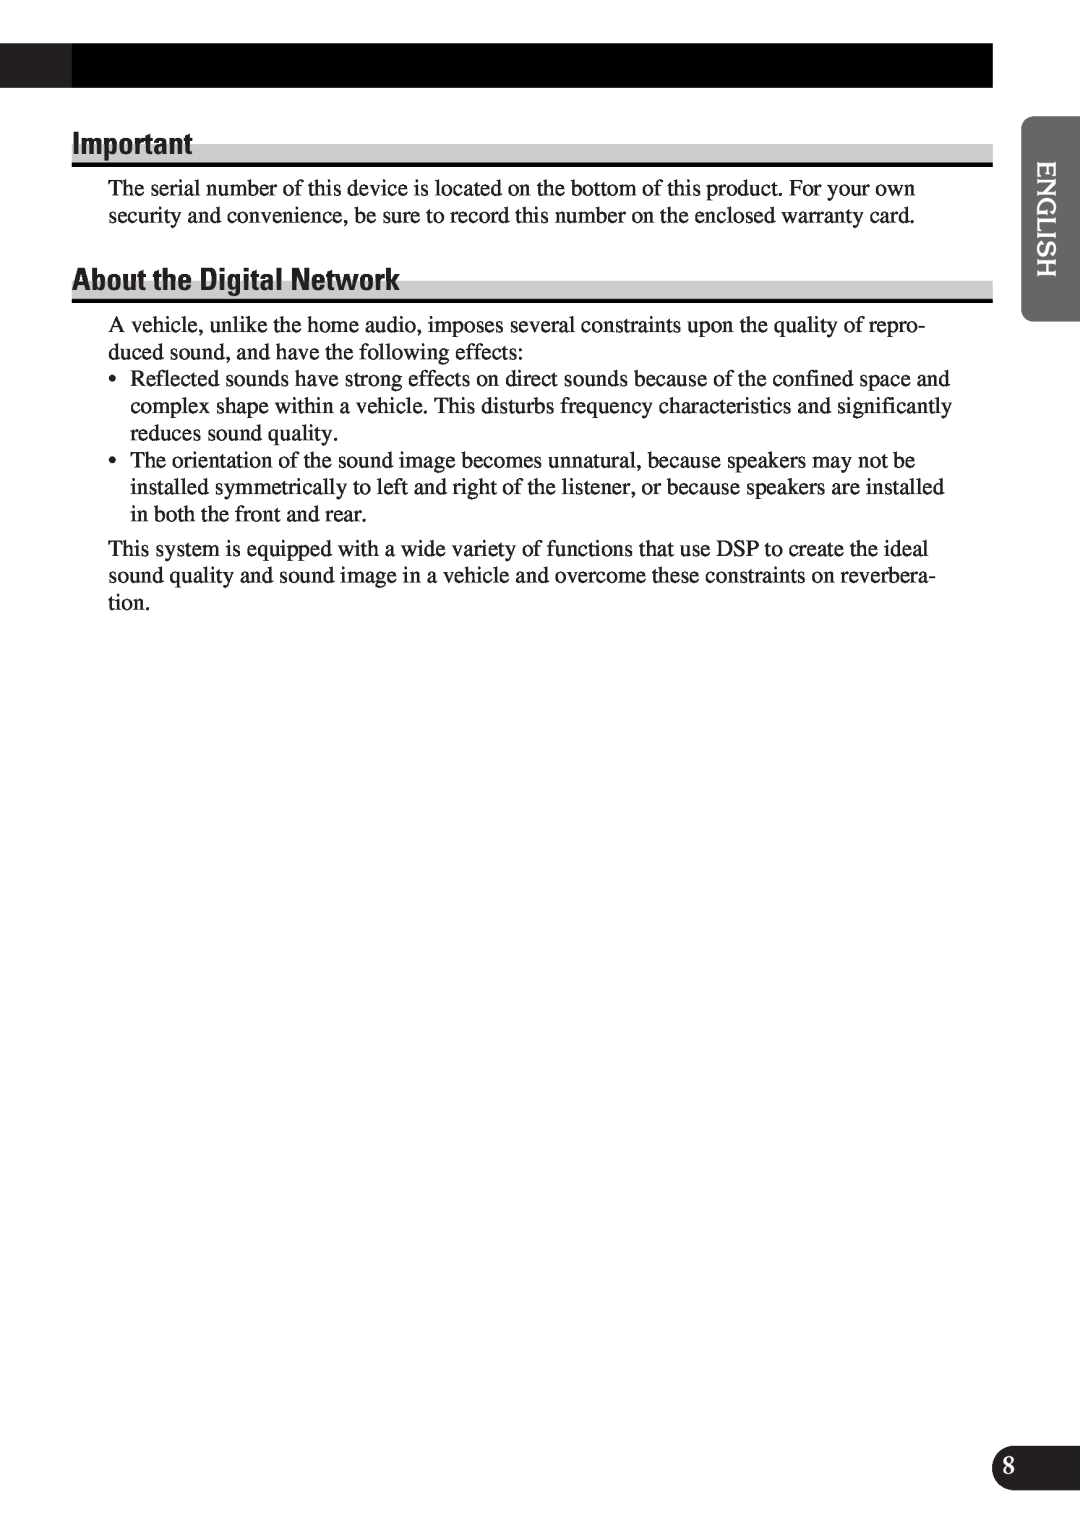 Pioneer DEQ-P9 owner manual About the Digital Network 